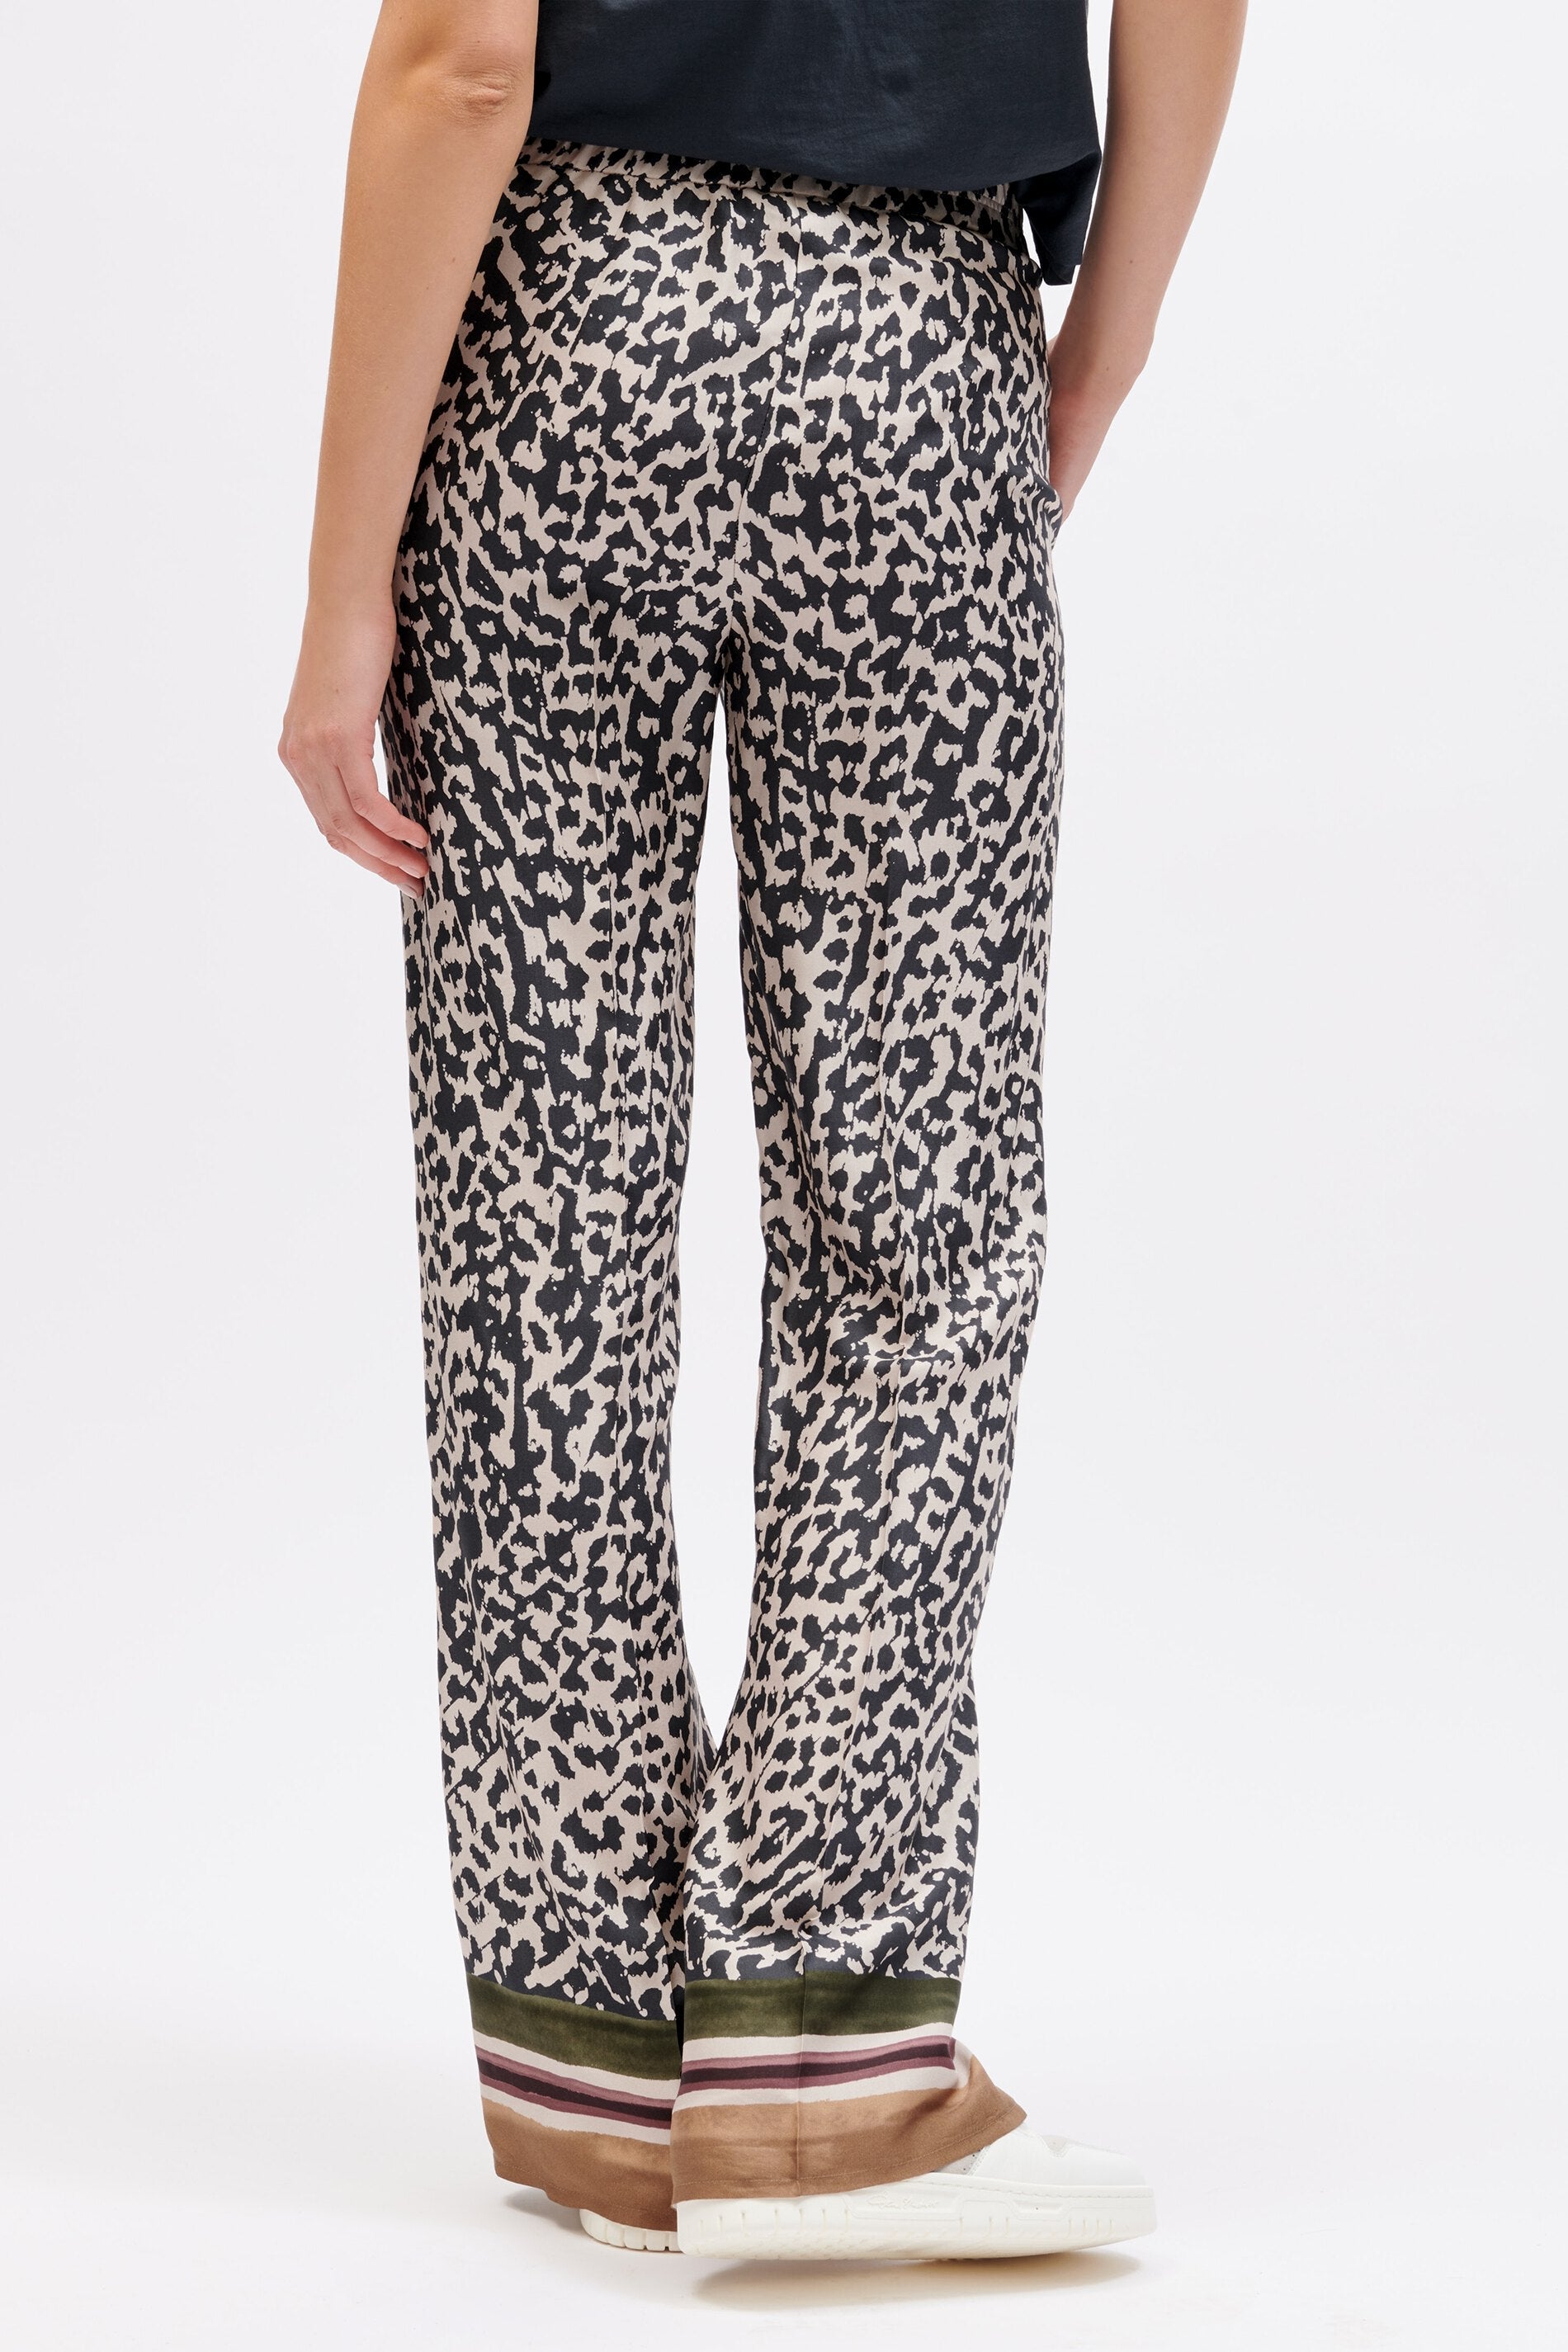 LUISA-CERANO-OUTLET-SALE-Bootcut mit Arty-Animal-Print-ARCHIVIST